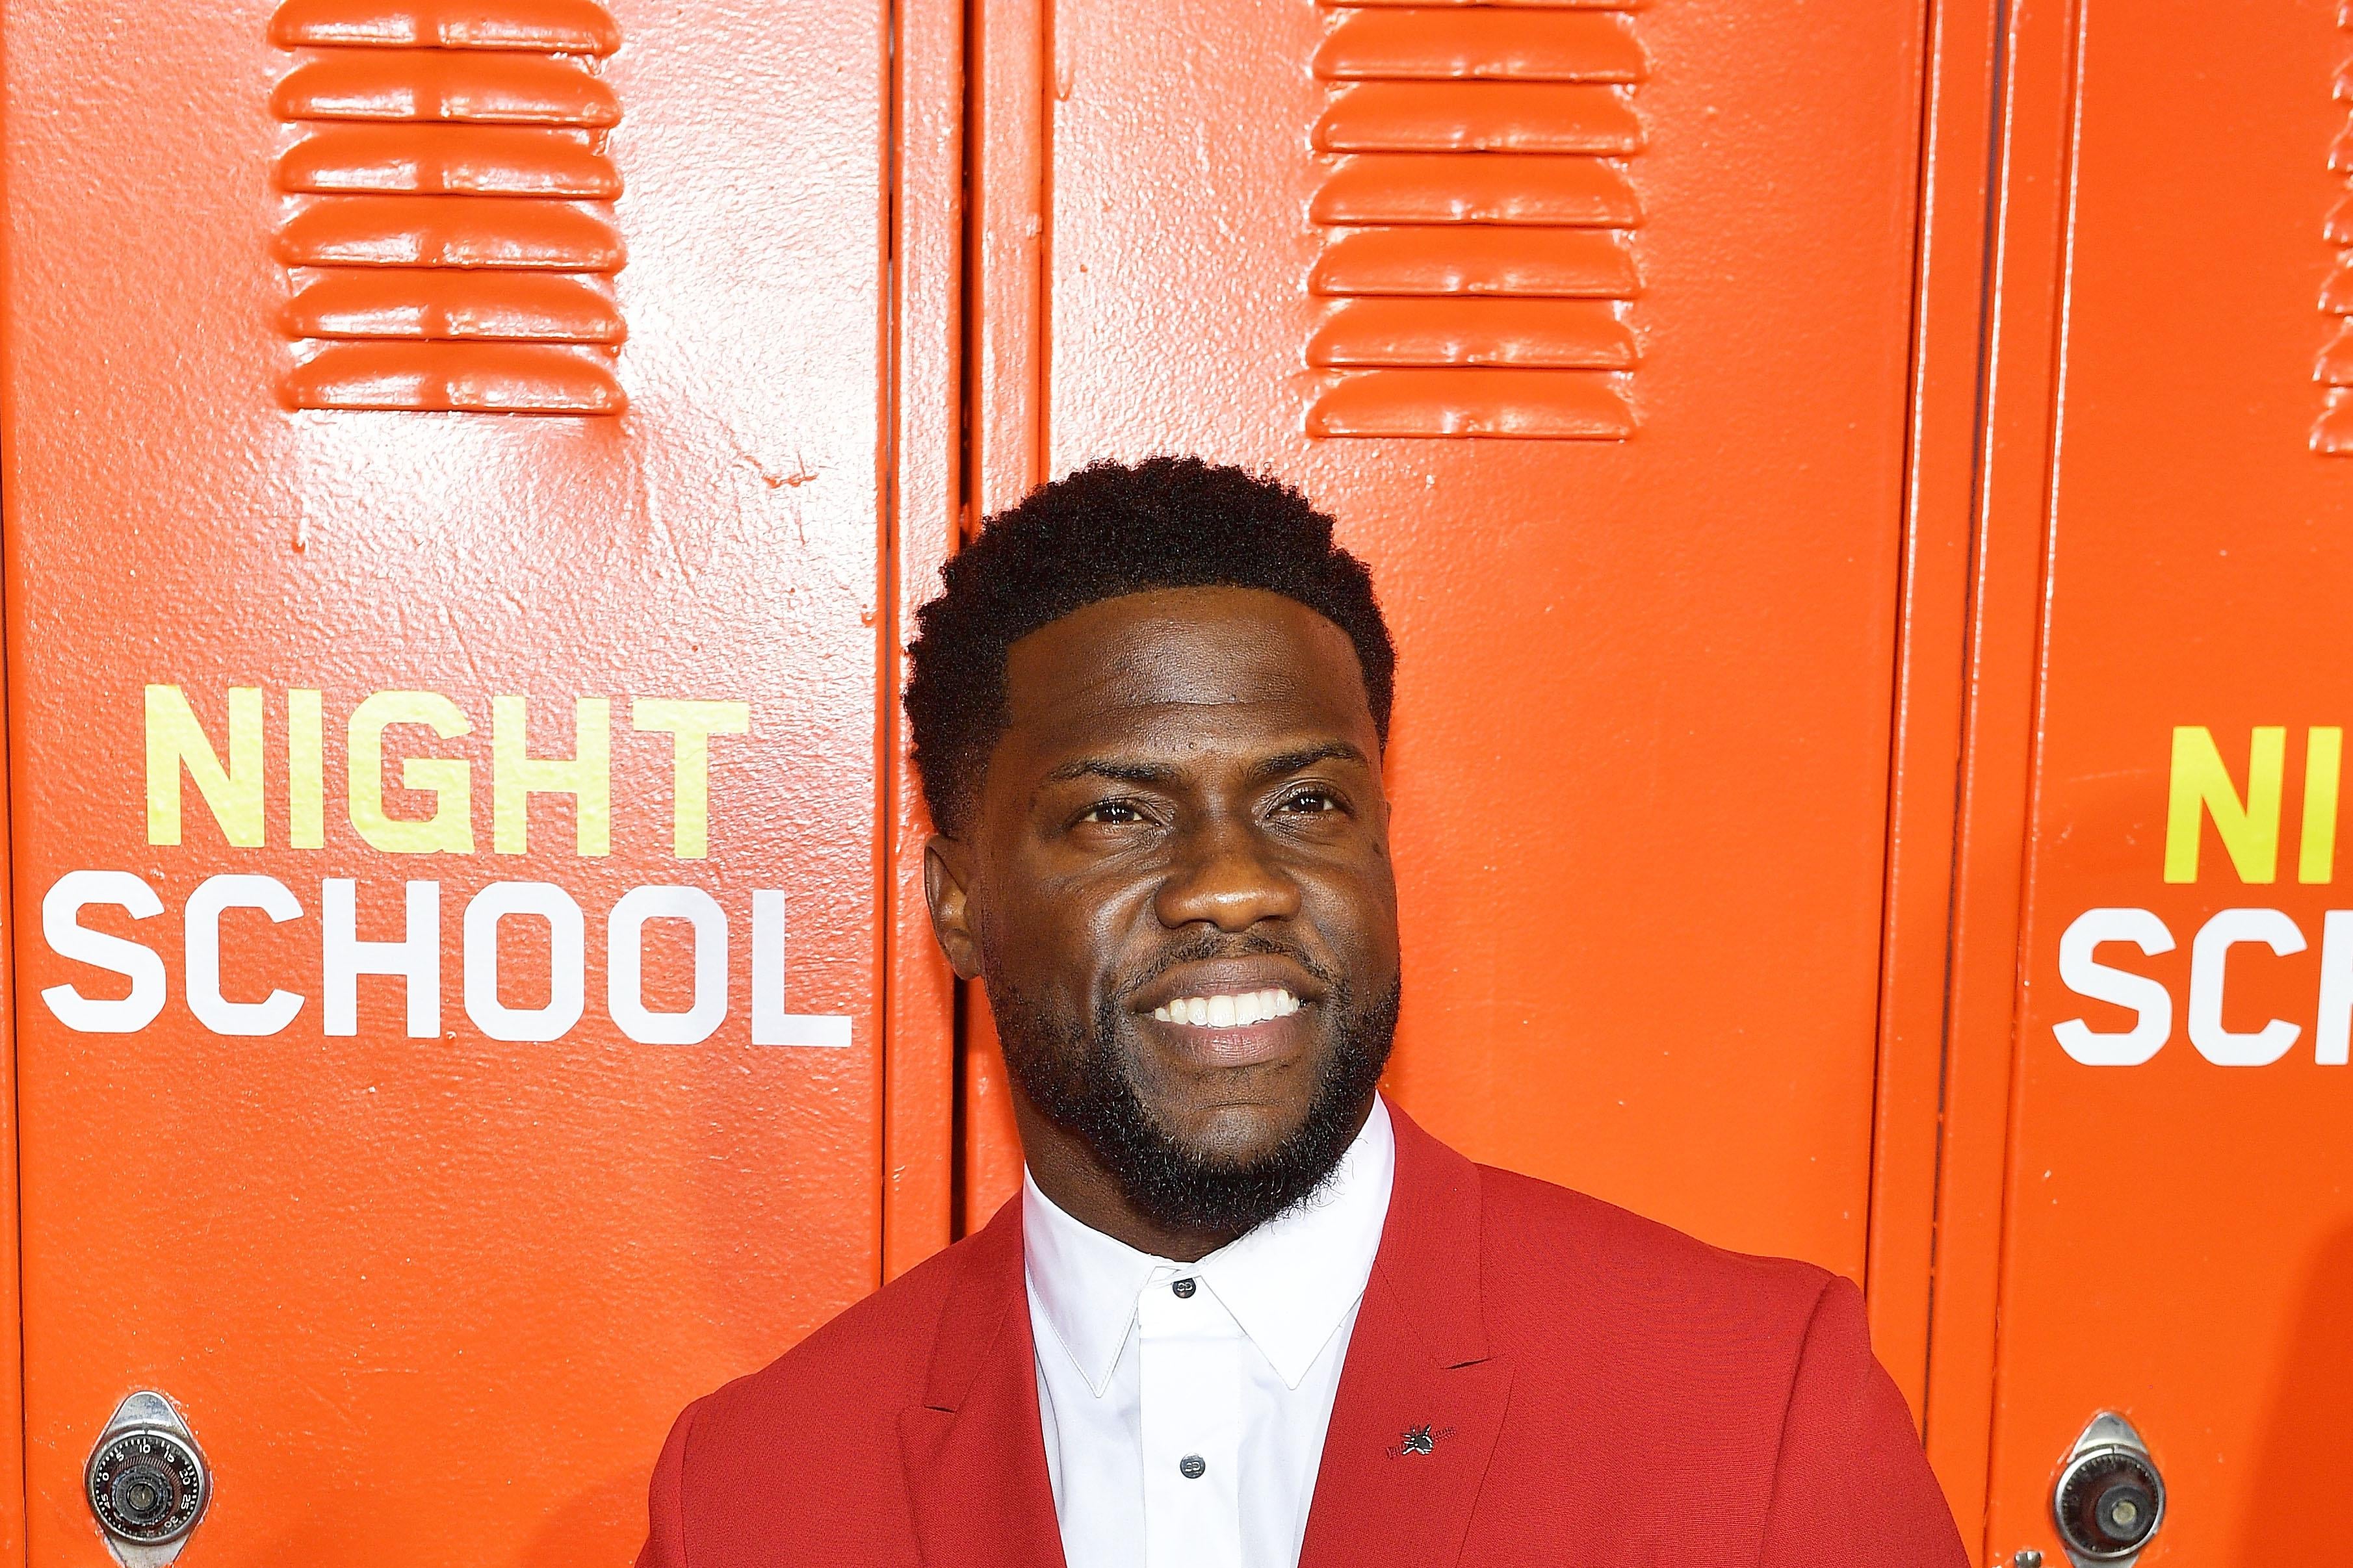 Kevin Hart on a red carpet for Night School.